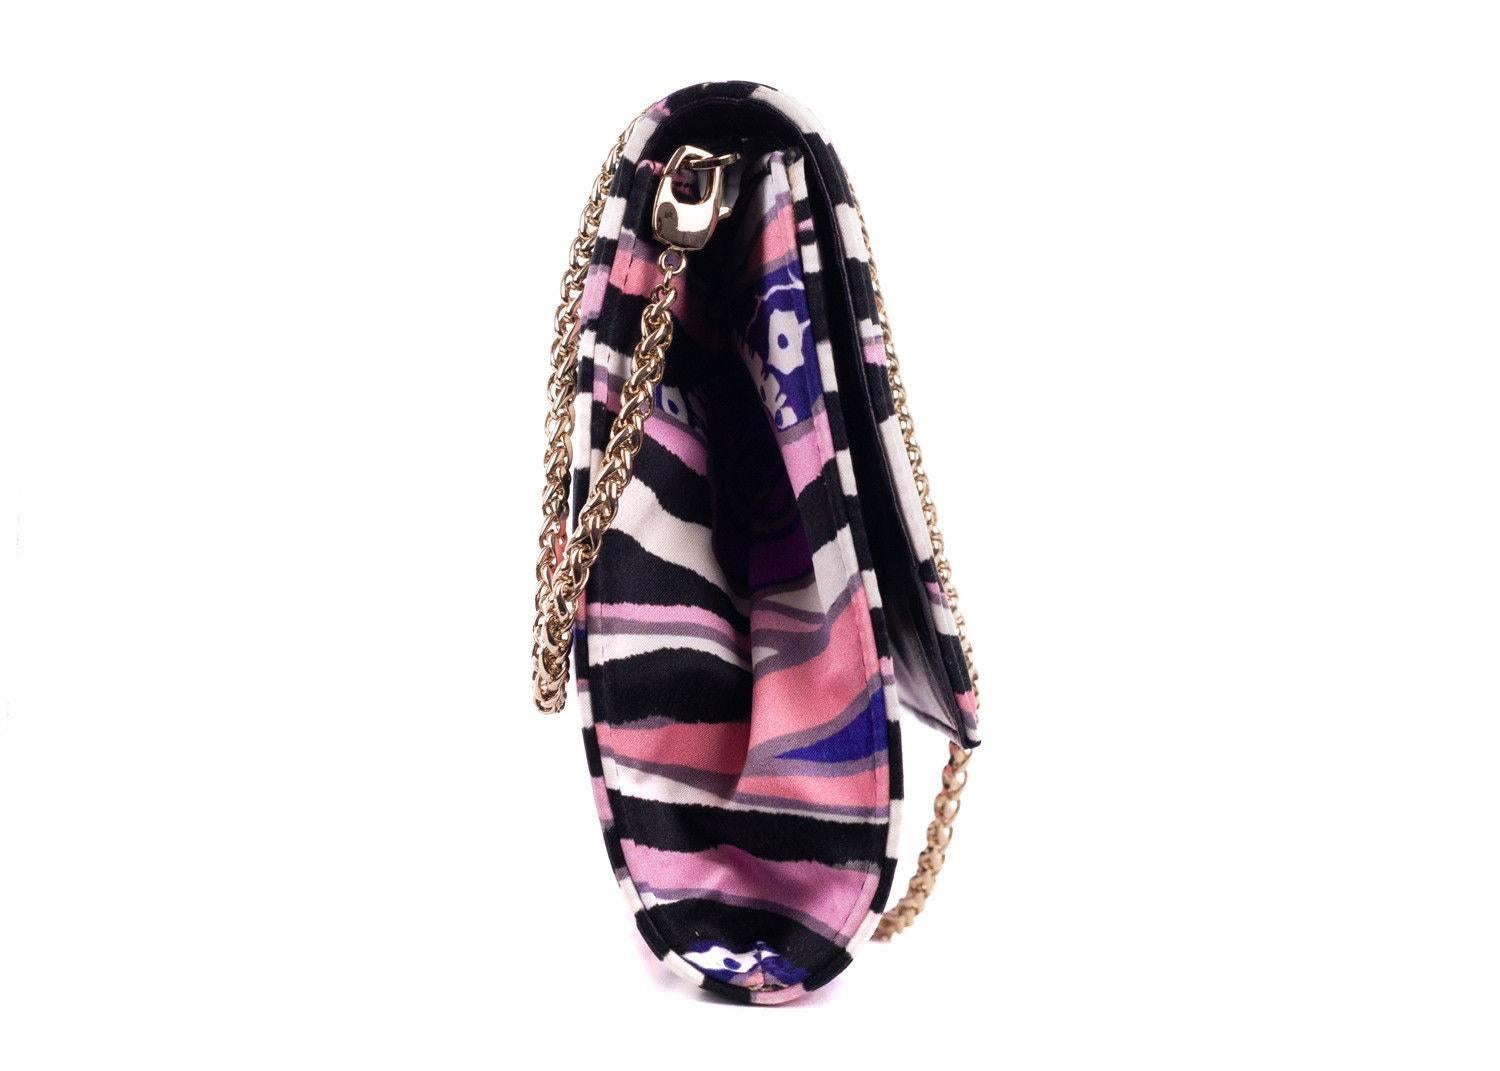 Roberto Cavalli multicolor pink purple clutch. This clutch can also be worn as a shoulder bag with its detachable gold chain shoulder strap. Perfect for the incoming spring summer season, pair it with denim and a cute solid blouse for a chic laid